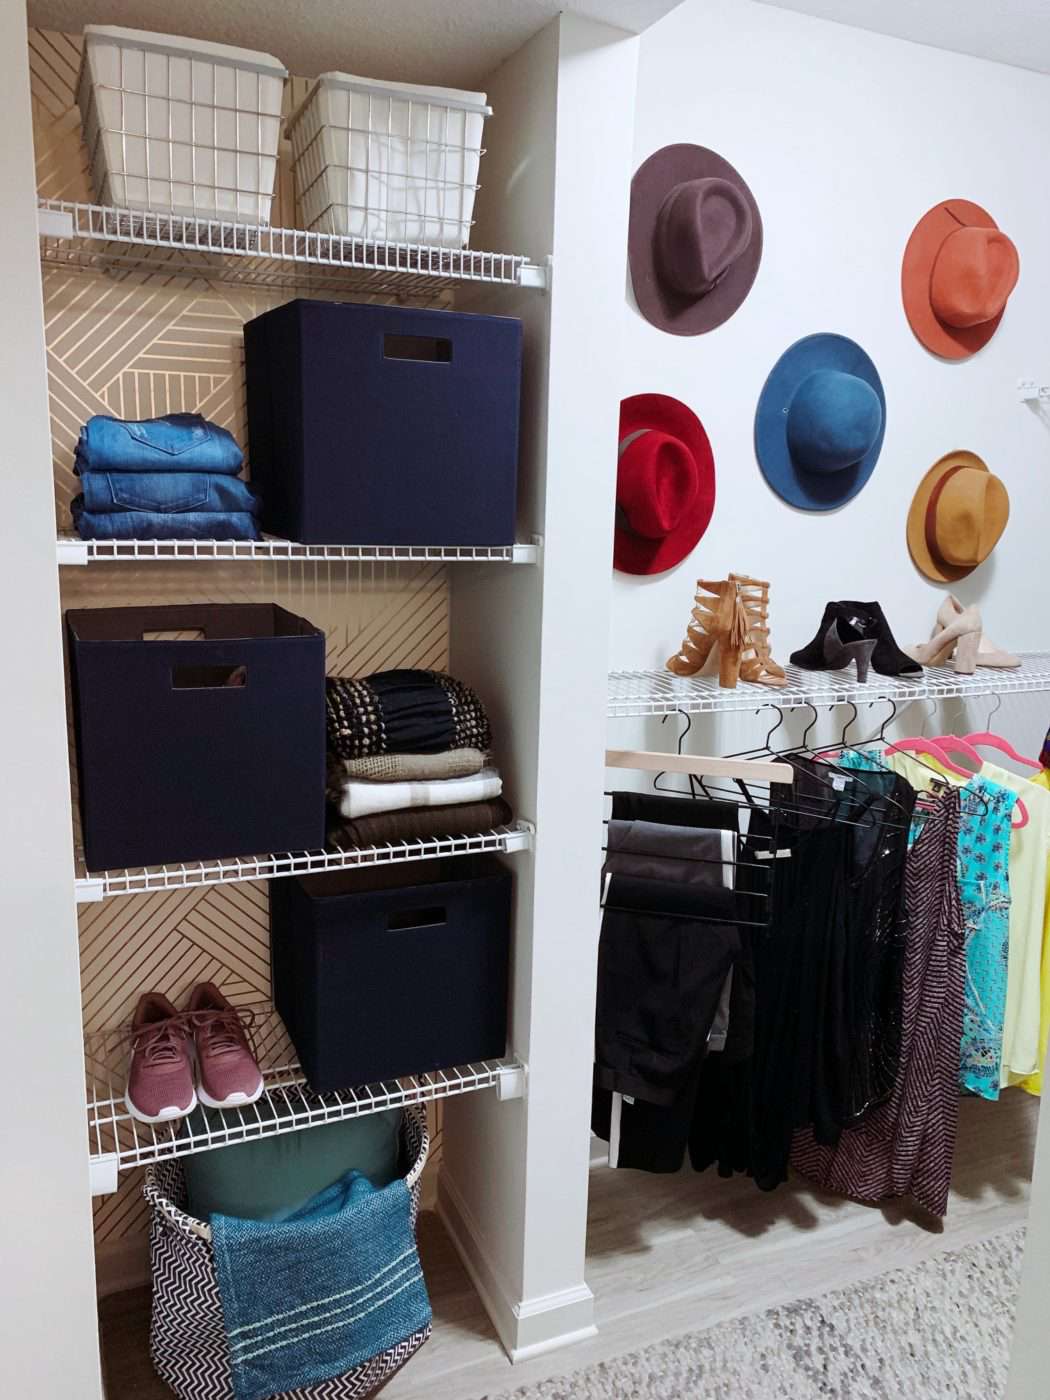 room for hats in walk-in closet